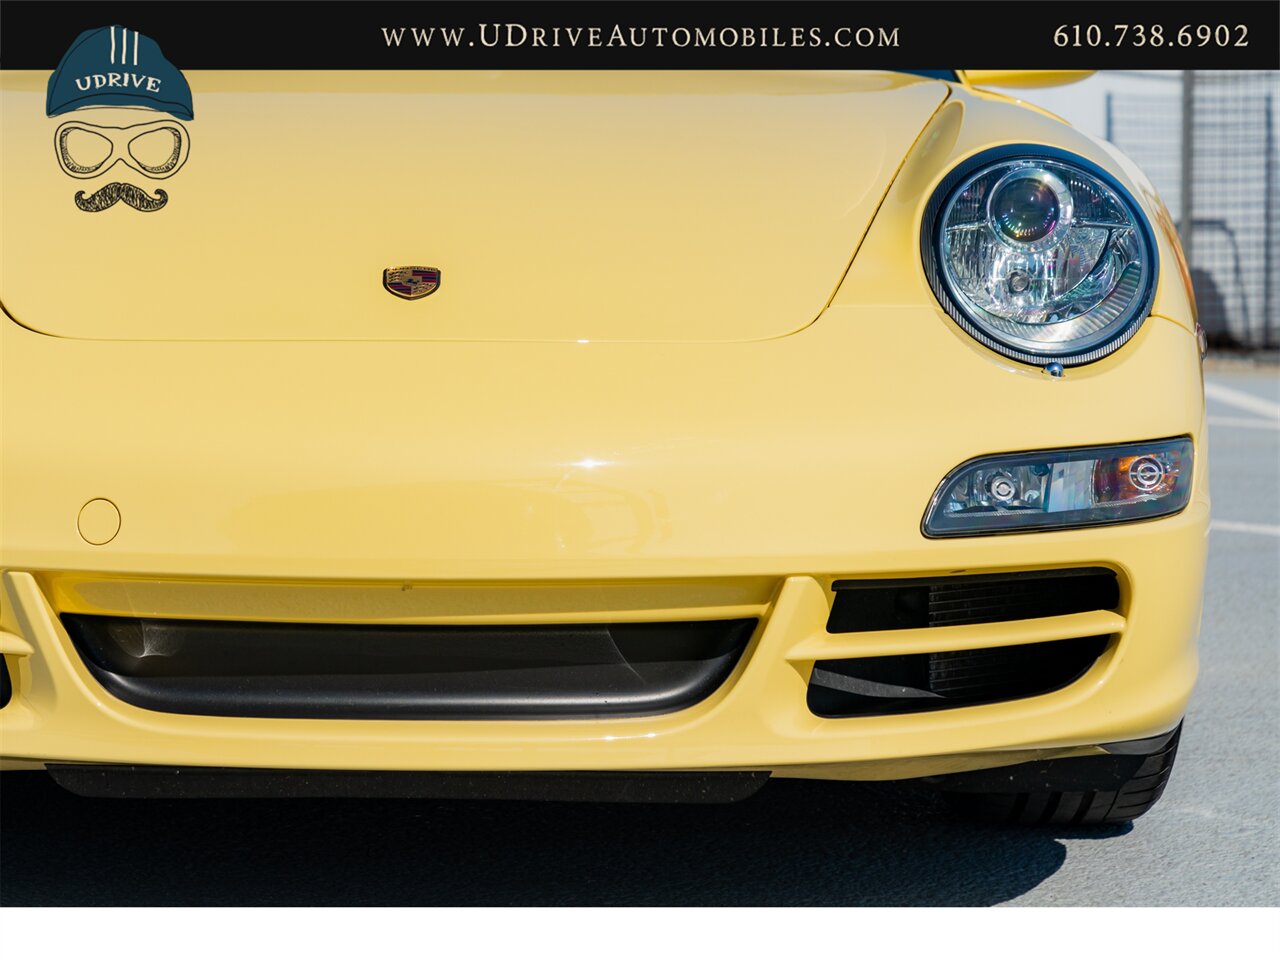 2007 Porsche 911 Carrera 4S 997 C4S Paint To Sample Pastel Yellow  6 Speed Sport Chrono Full Leather Yellow Gauges - Photo 11 - West Chester, PA 19382